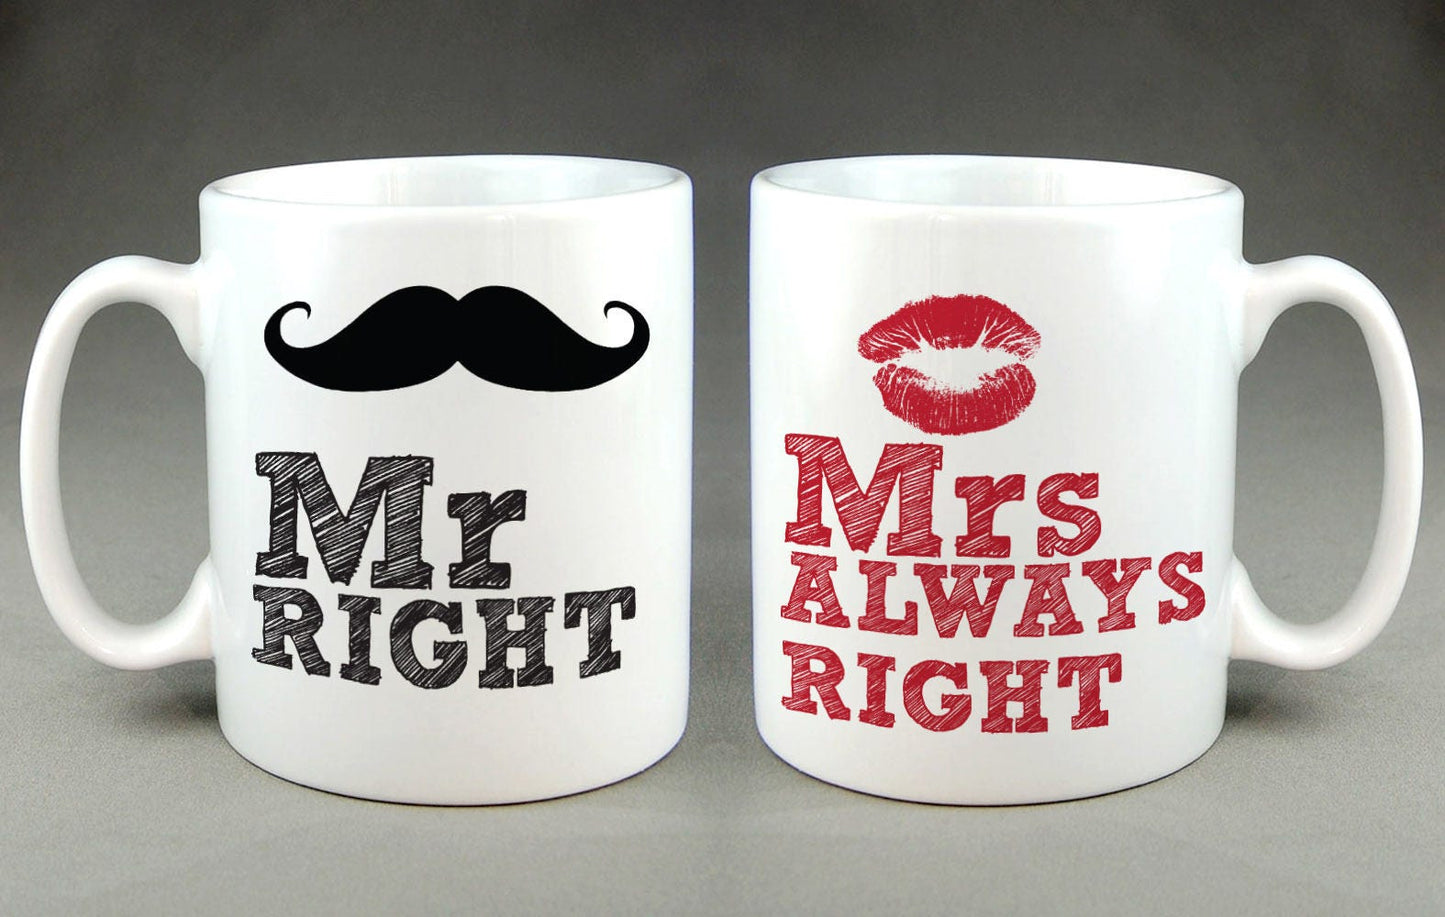 Mr Right/ Mrs Always Right Matching Mug Set for Husband and Wife